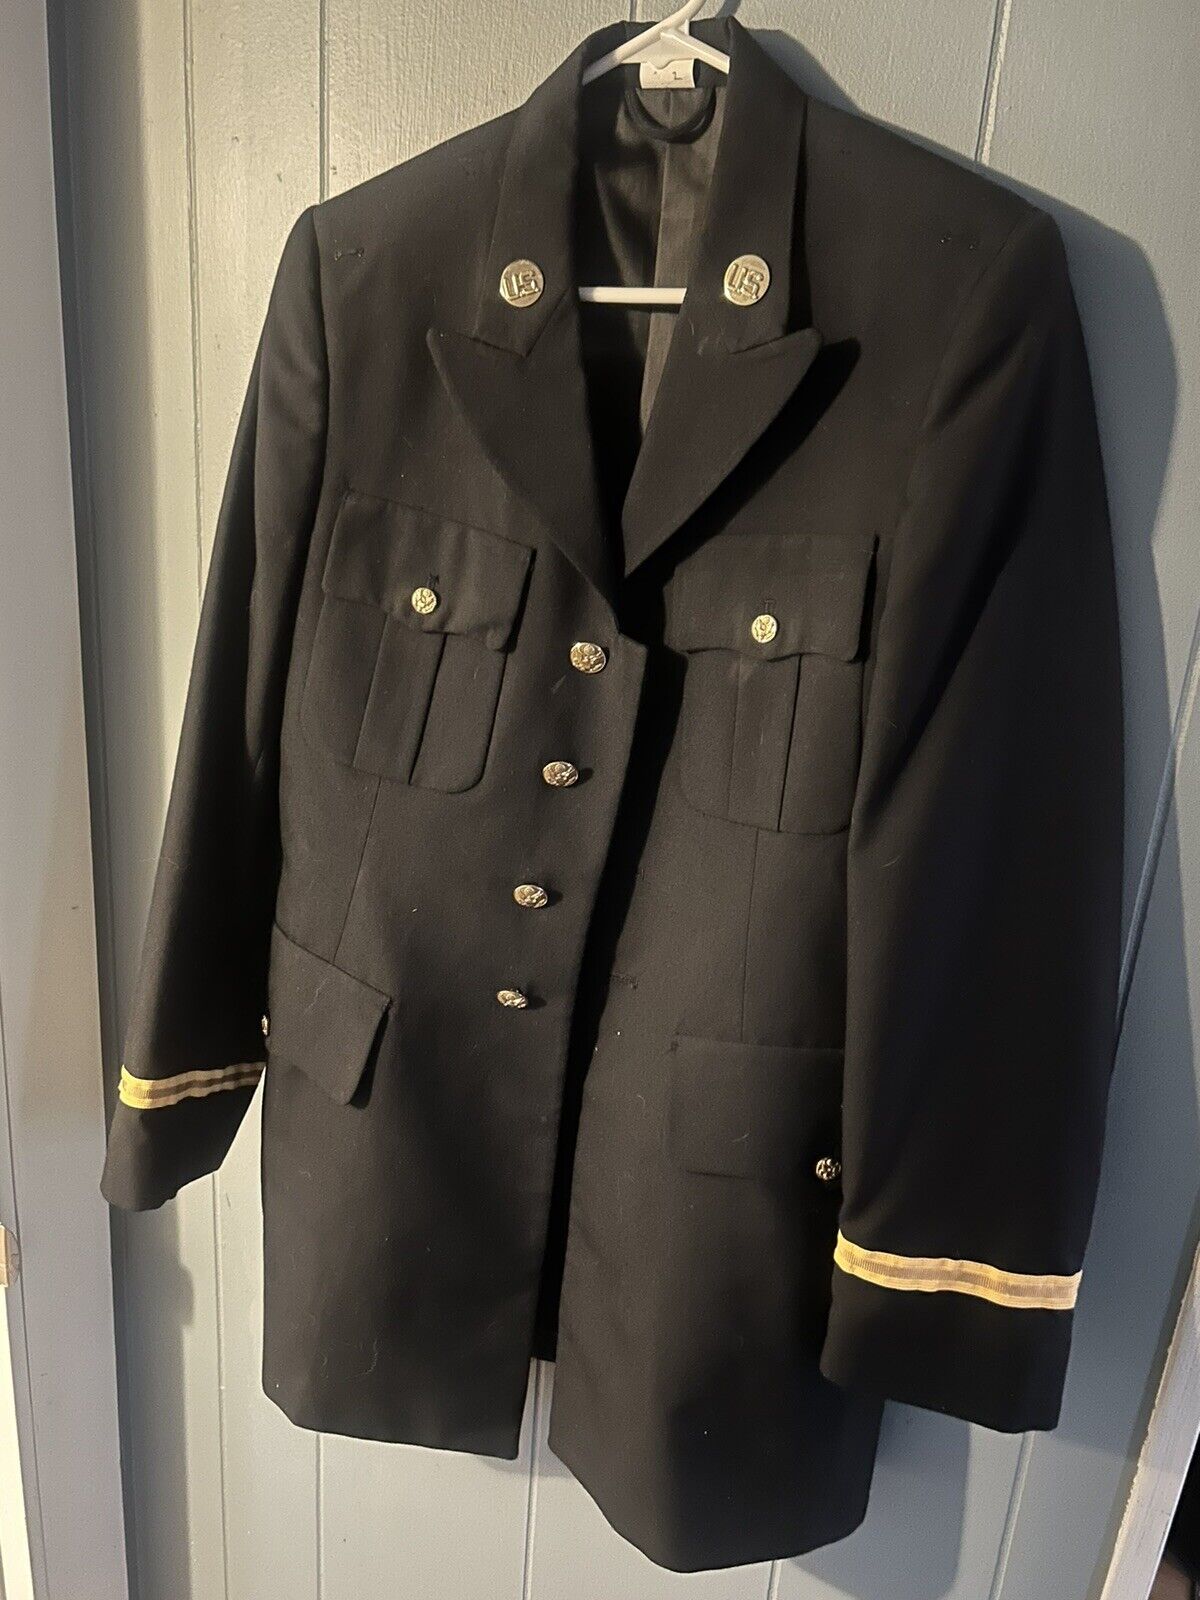 Vintage U.S. Army Officer\'s Dress Blue 450 Uniform Coat & Shirt With Extras